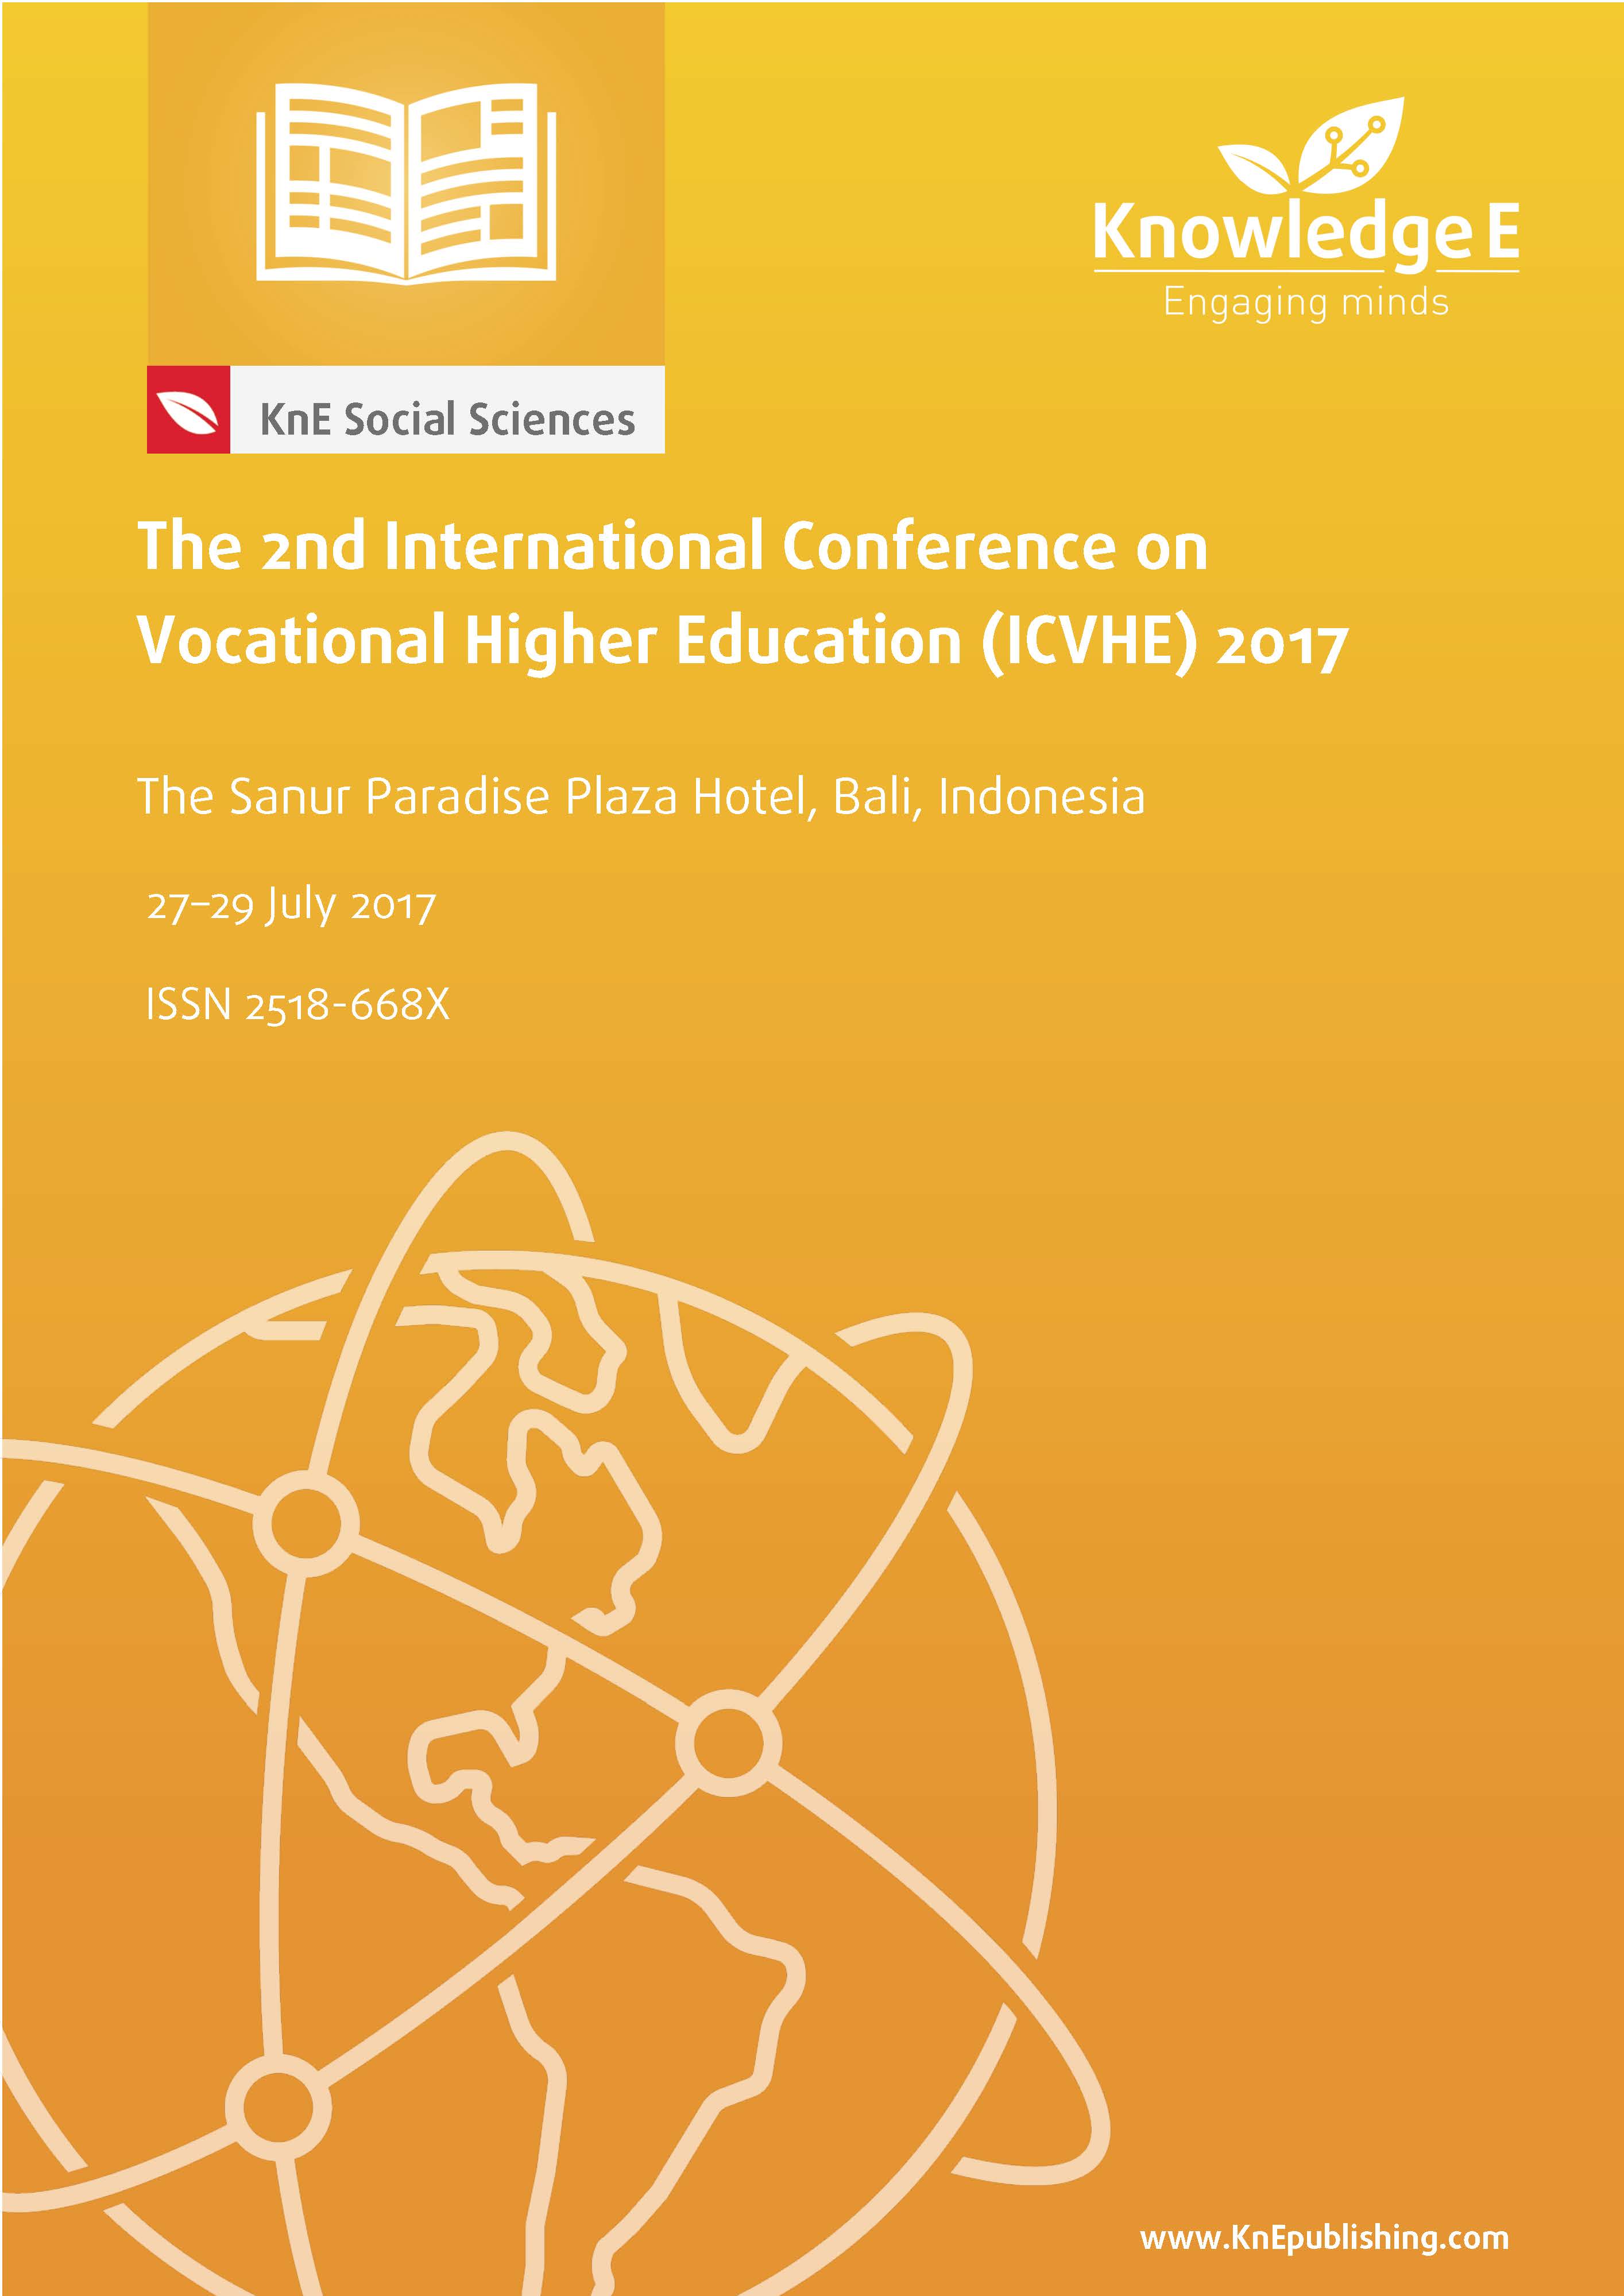 The 2nd International Conference on Vocational Higher Education (ICVHE